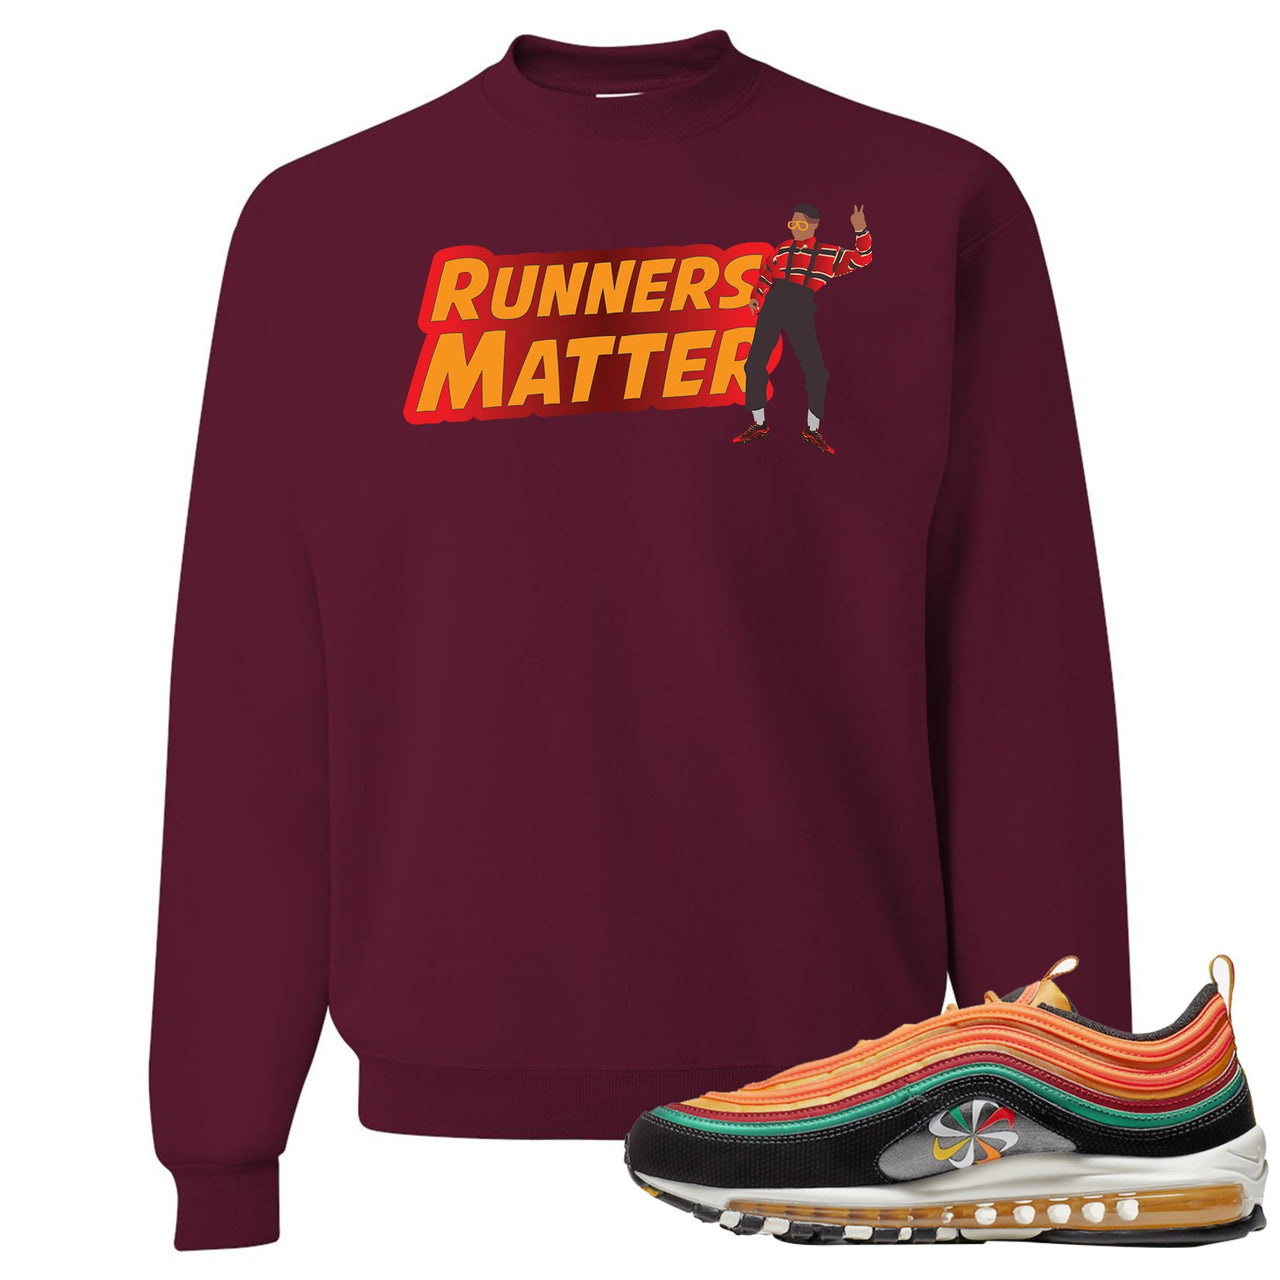 Printed on the front of the Air Max 97 Sunburst sneaker matching maroon crewneck sweatshirt is the Runners Matter logo